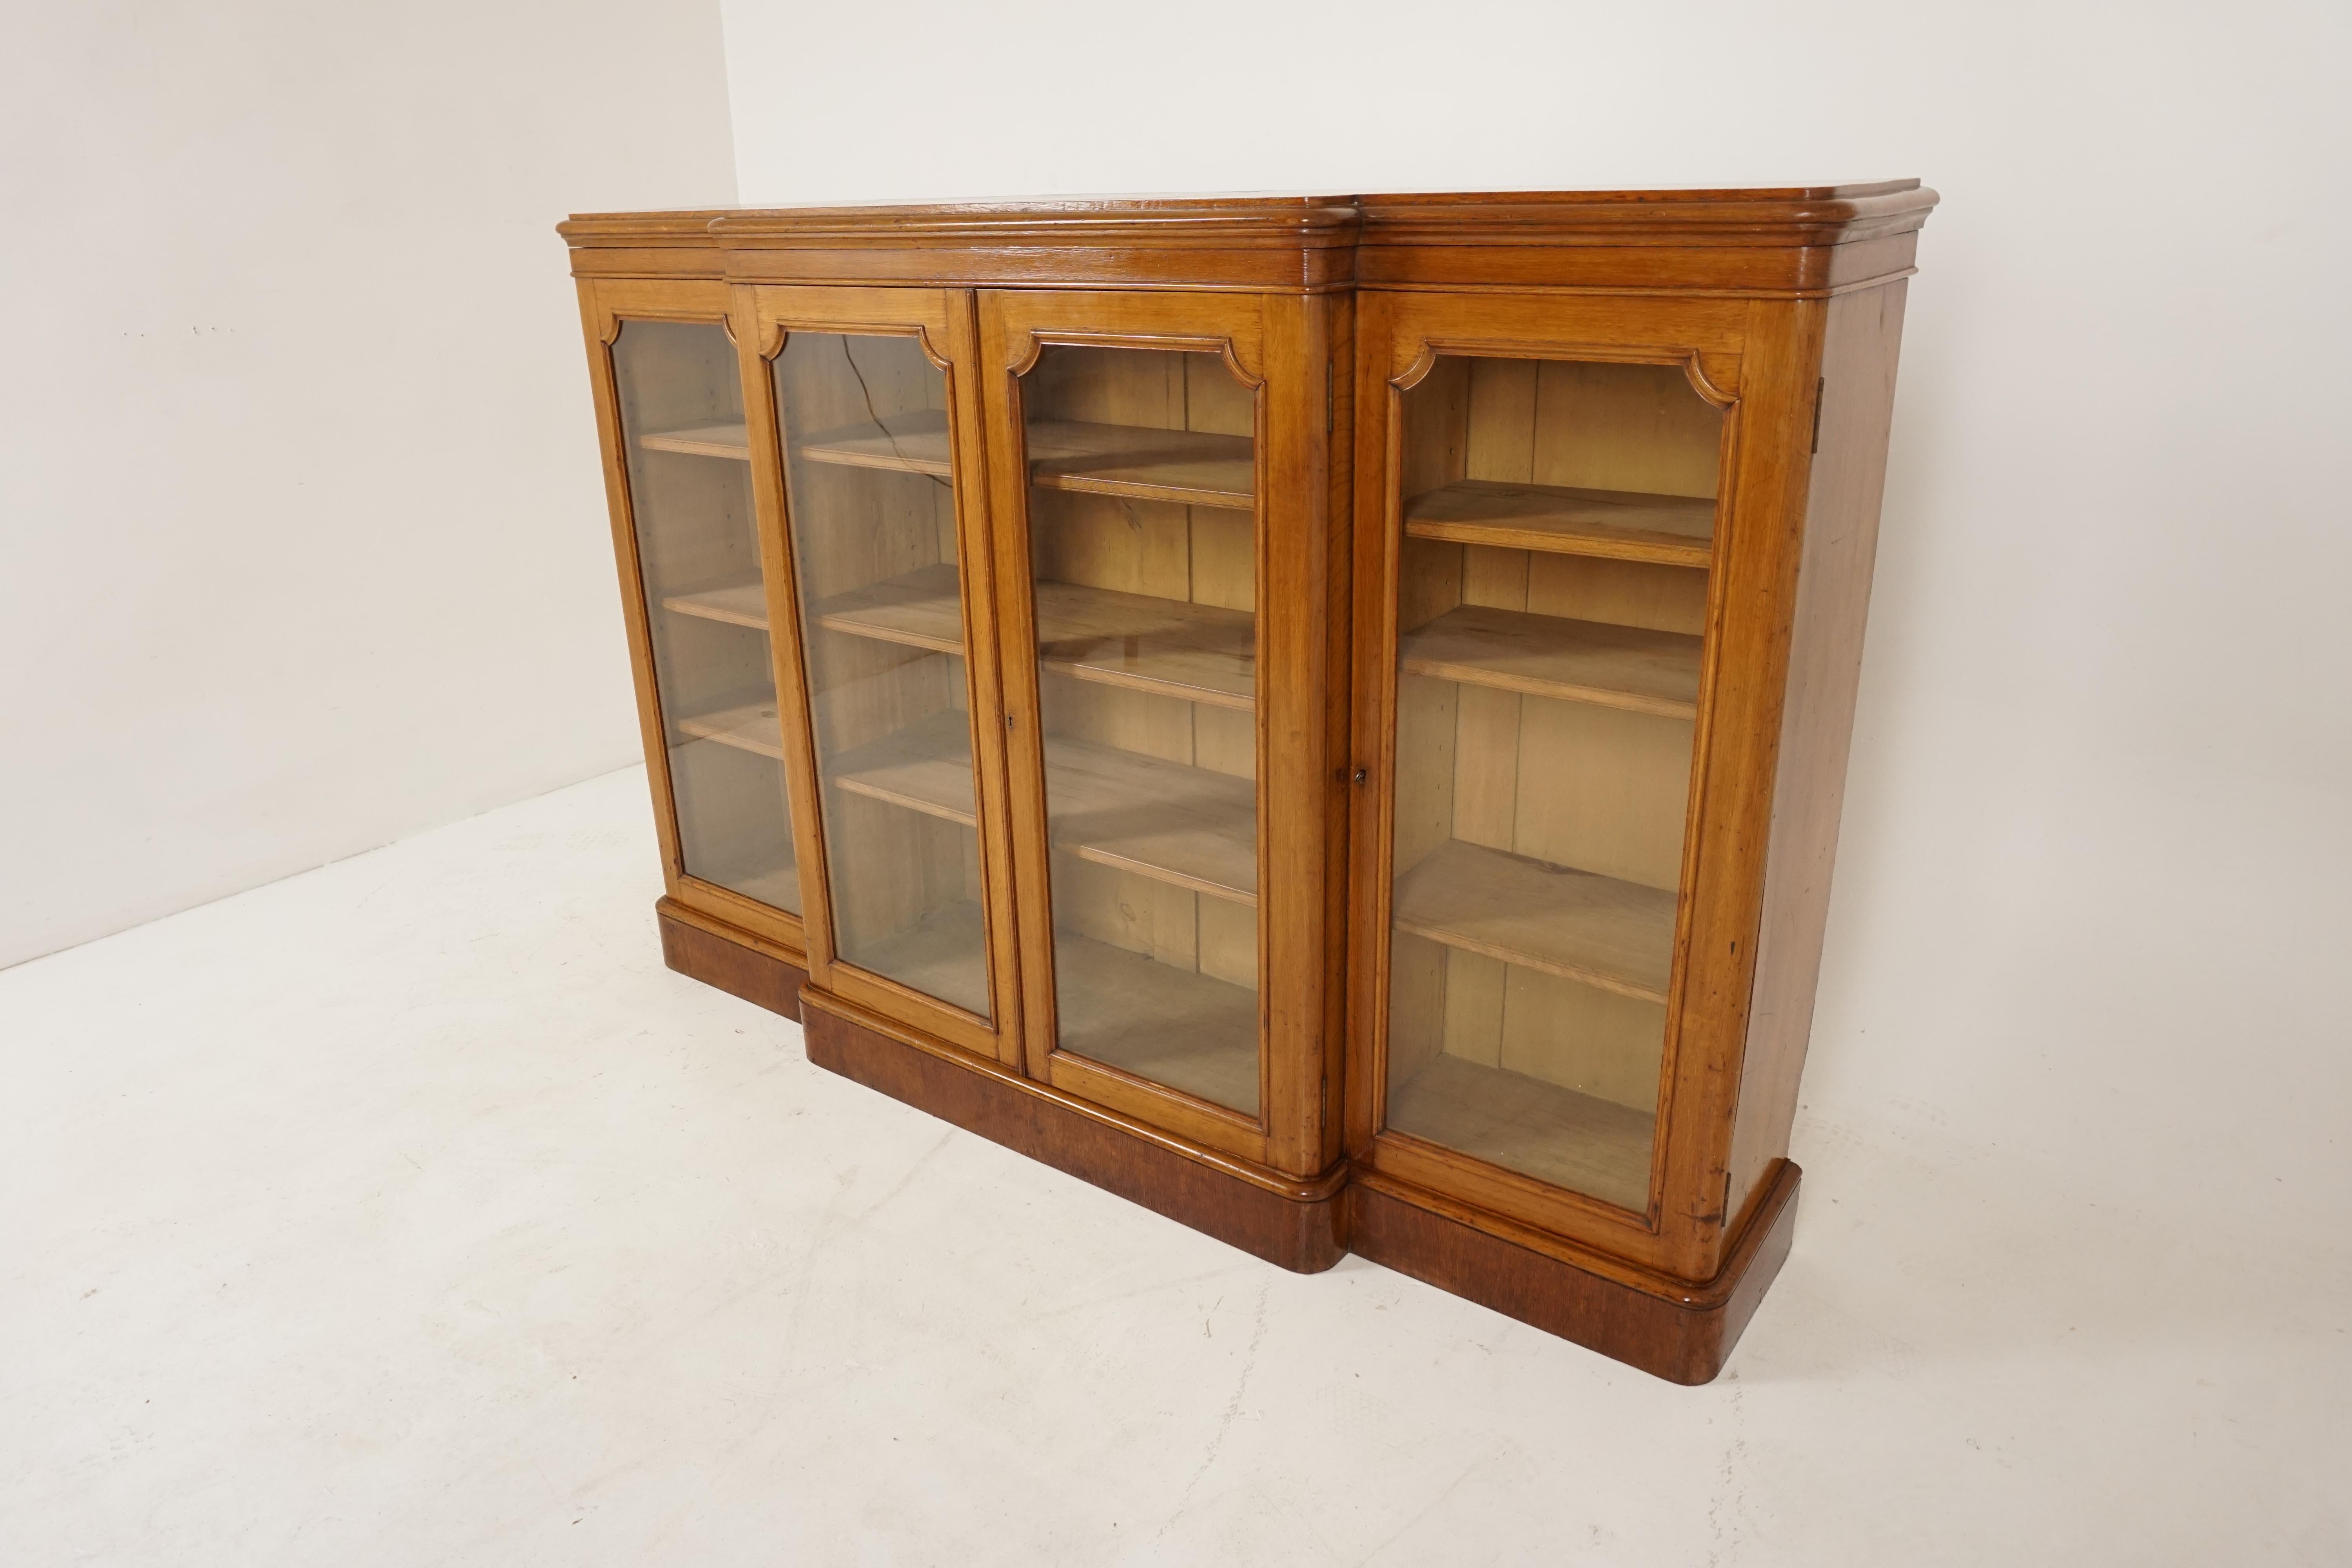 Antique Victorian tiger oak breakfront bookcase display cabinet, Scotland 1880, B2551

Scotland 1880
Solid tiger oak
Original finish
Moulded breakfront top
Double glass doors underneath
Opens to reveal three adjustable shelves
Flanked by a